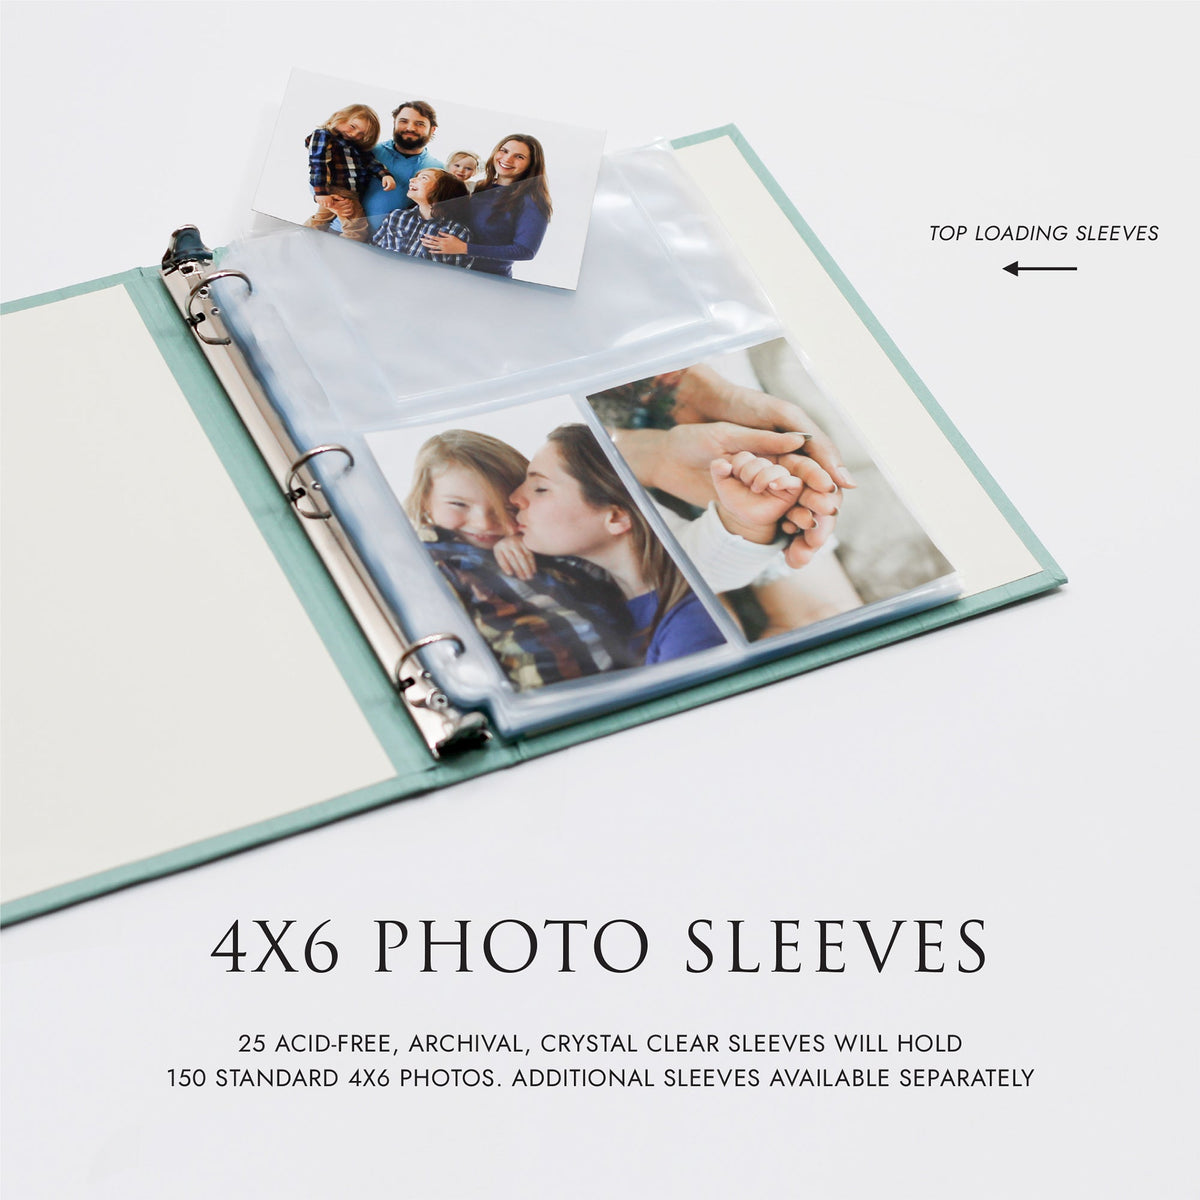 Large Photo Binder For 4x6 Photos | Cover: Black Vegan Leather | Available Personalized